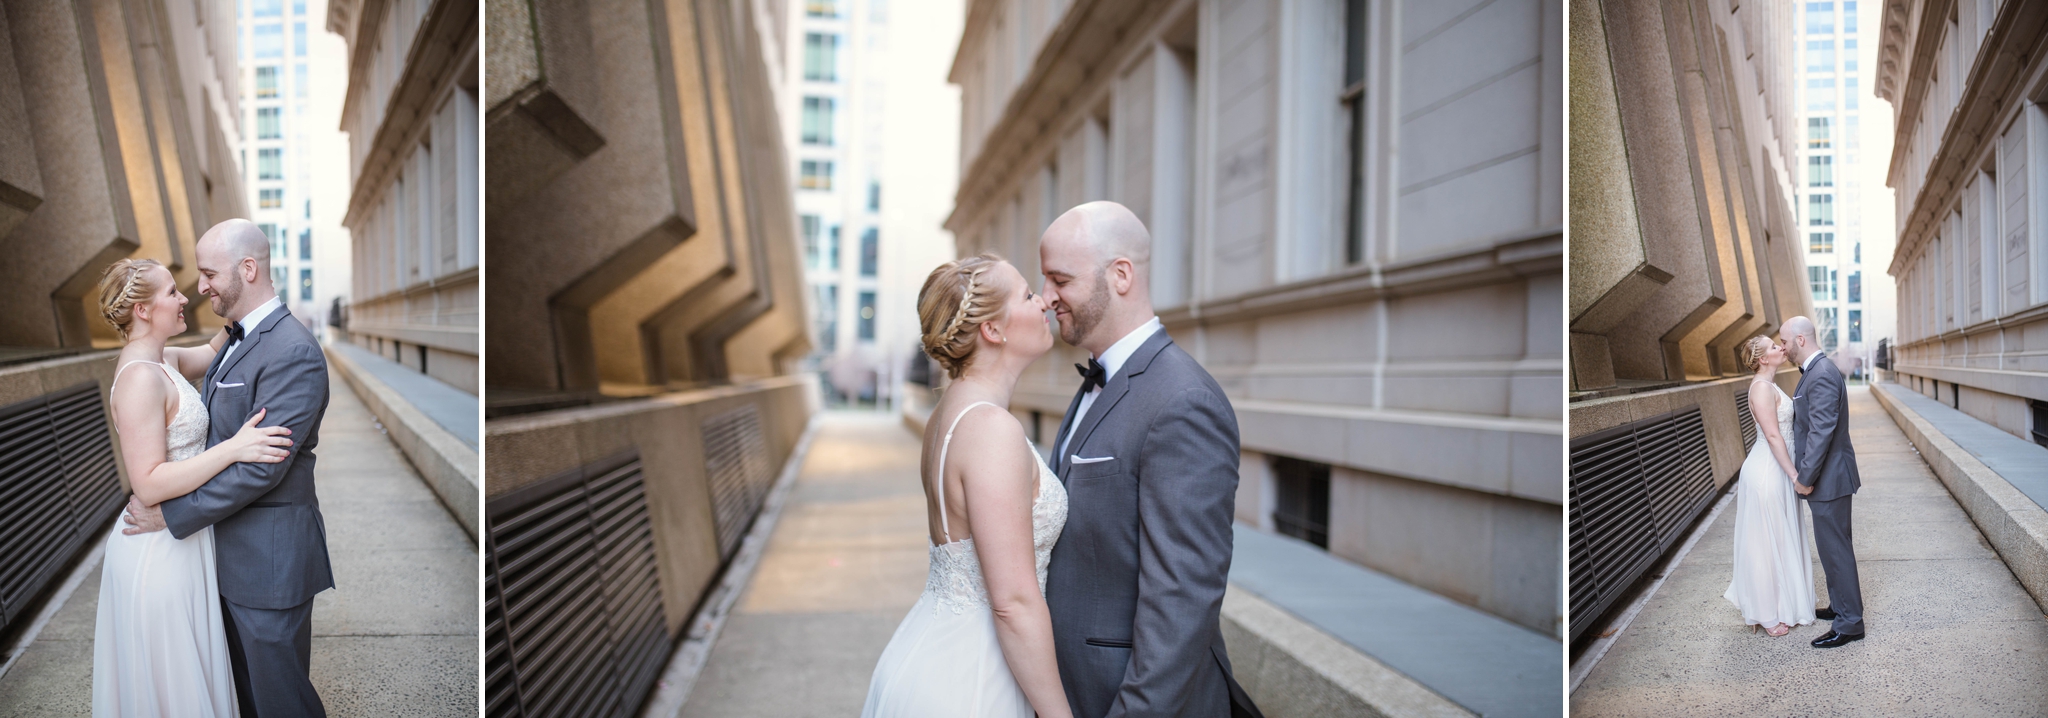 Downtown Raleigh Engagement Photography Session - North Carolina Wedding Photographer